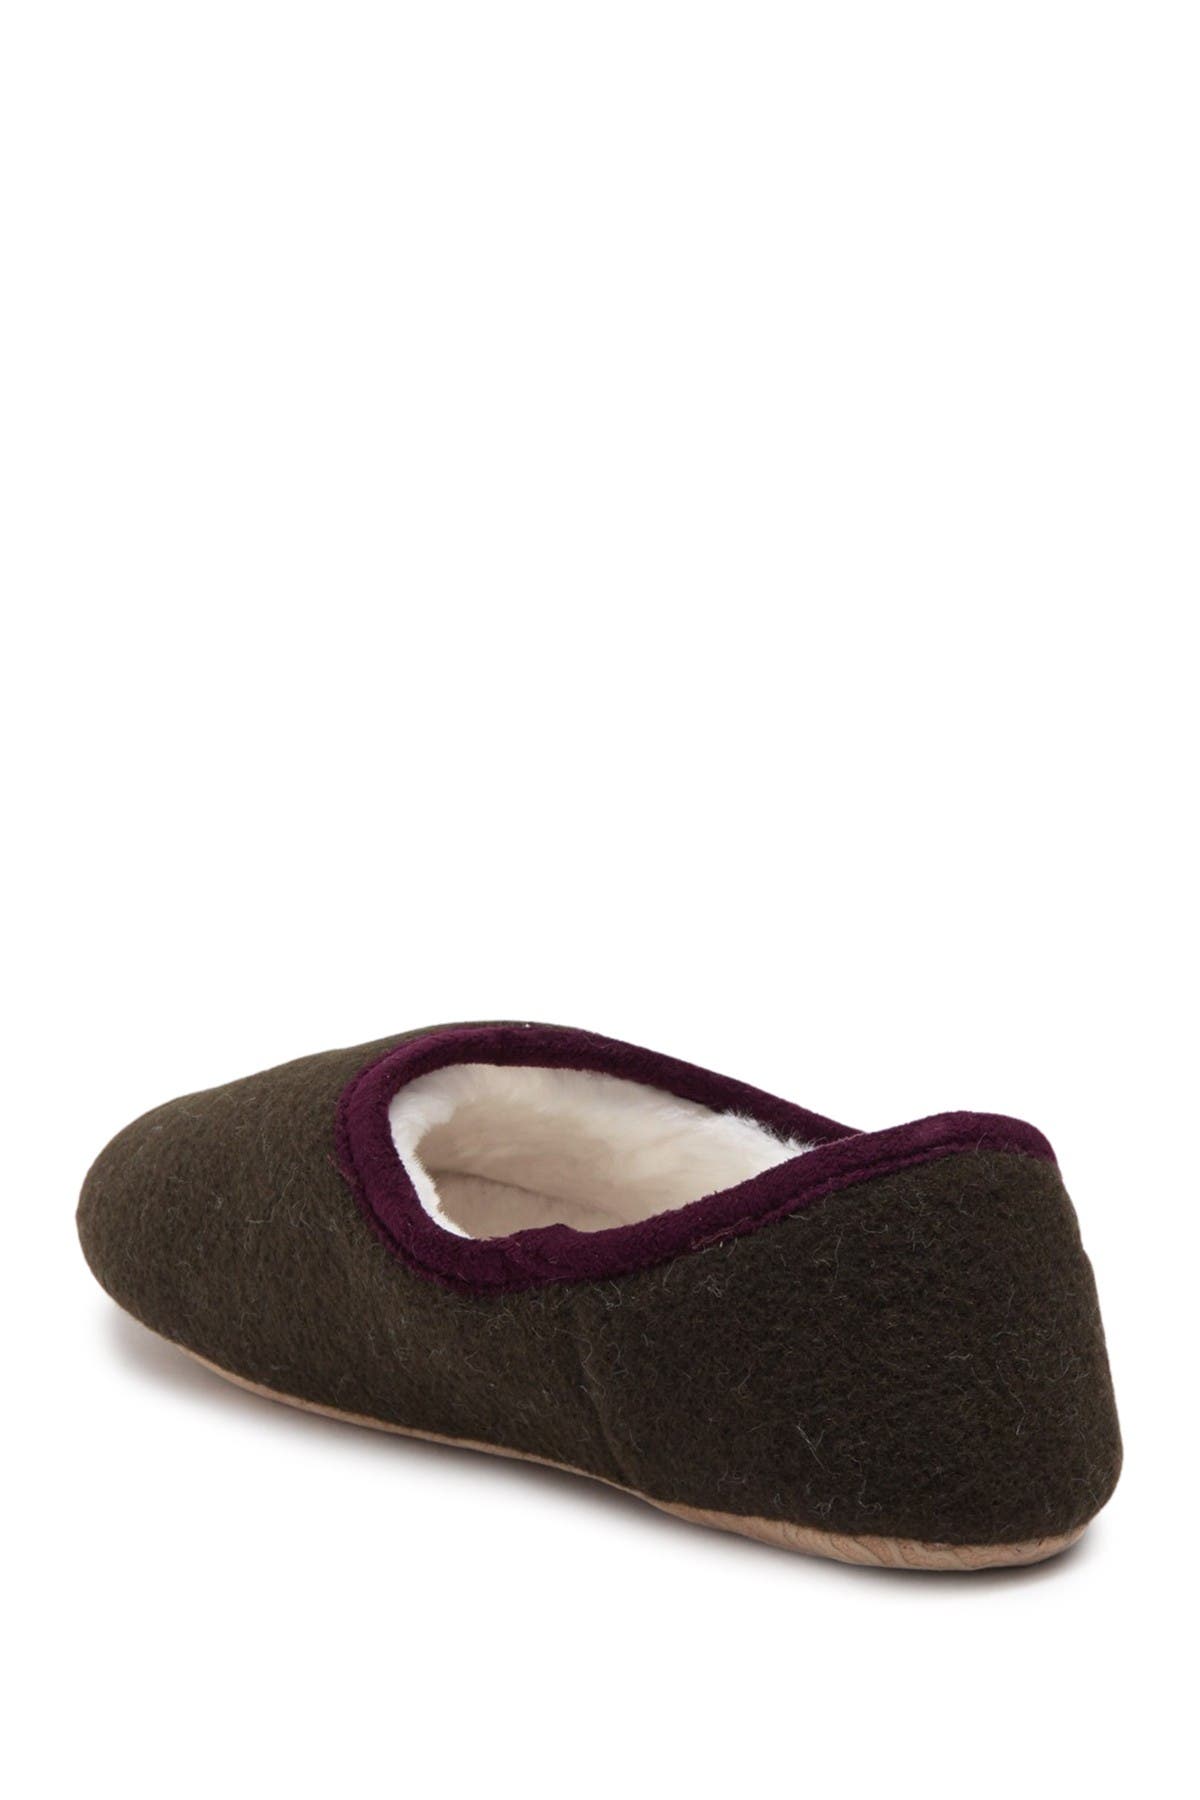 Joules Faux Fur Lined Slipper In Oxford4